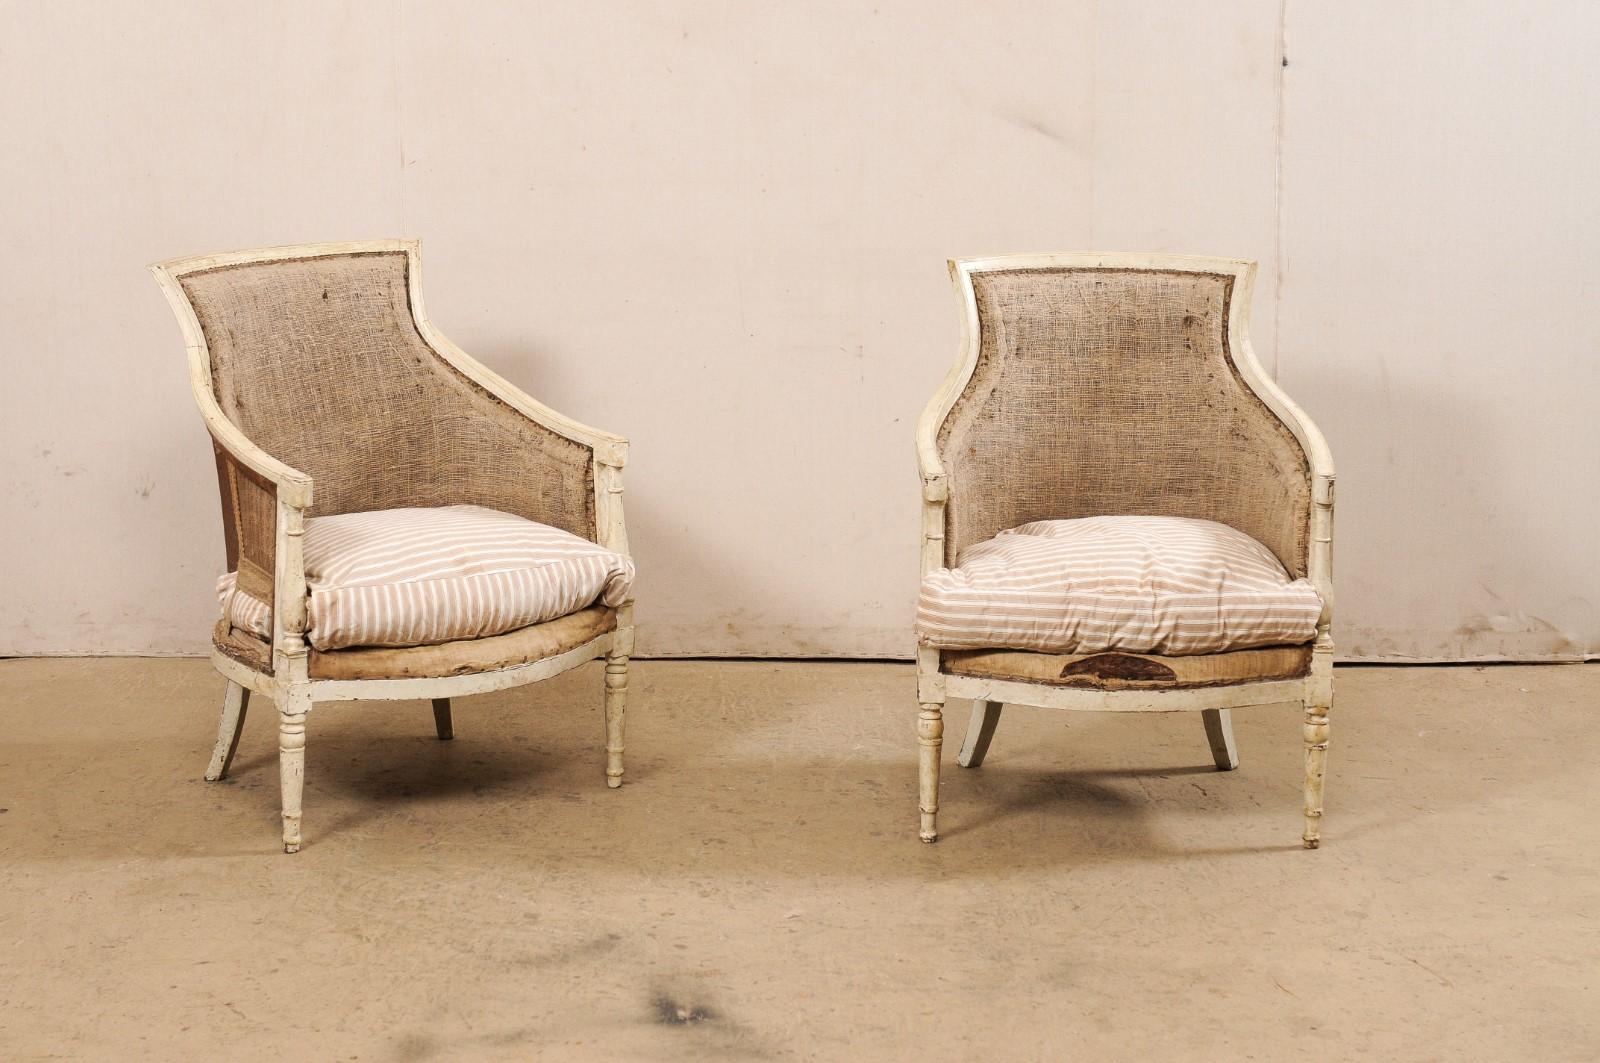 A French Neoclassical pair of carved-wood and upholstered tub-style armchairs from the 19th century. This antique pair of bergères occasional chairs from France have upholstered, tub-style backs with softly curved wooden top rail that slopes down